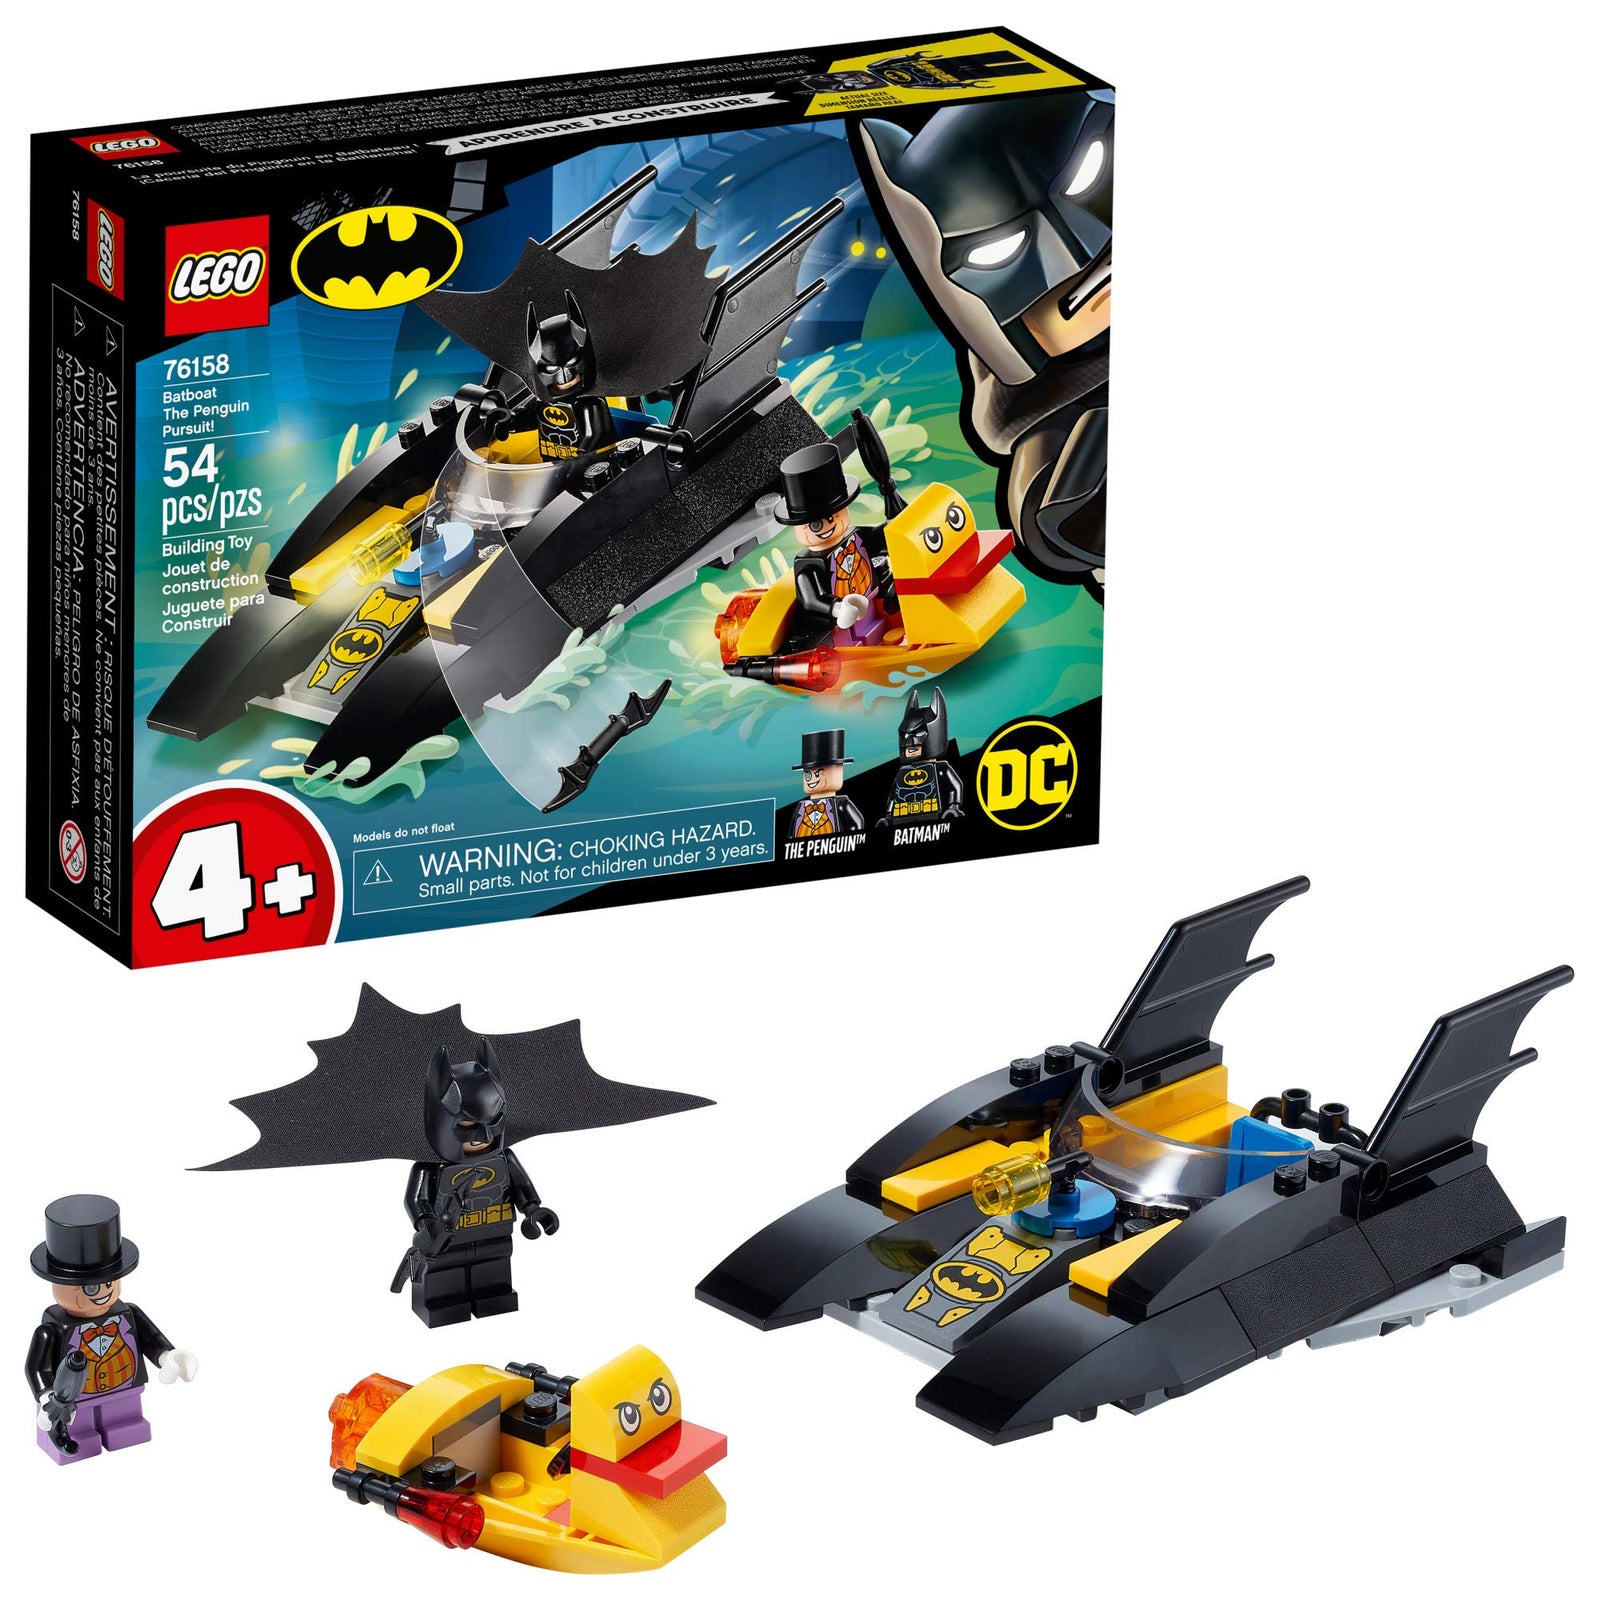 LEGO DC Batboat The Penguin Pursuit! 76158 Top Batman Building Toy for Kids, with Super-Hero Minifigures, 2 Boats, a Batarang and an Umbrella, Great Holiday or Birthday Gift (55 Pieces)